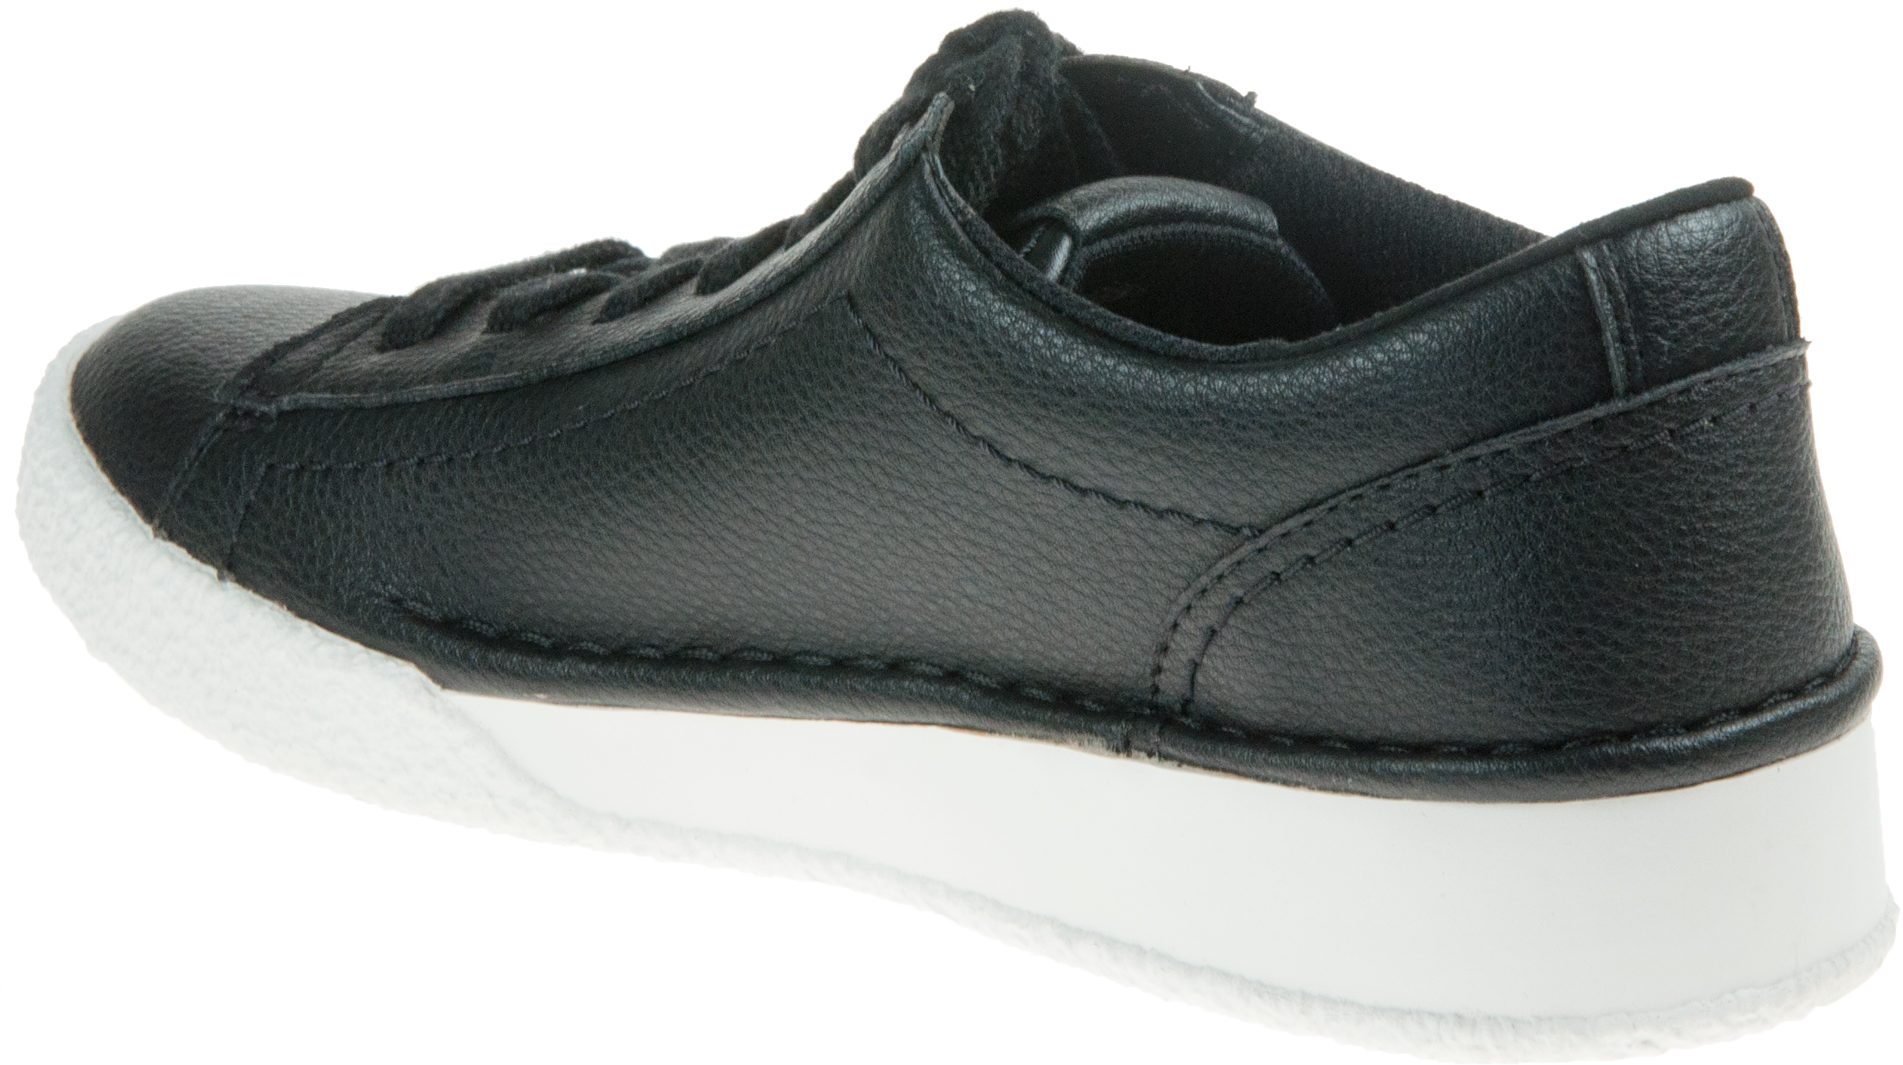 Clarks Craft Cup Walk Black Leather 26167764 - Everyday Shoes ...